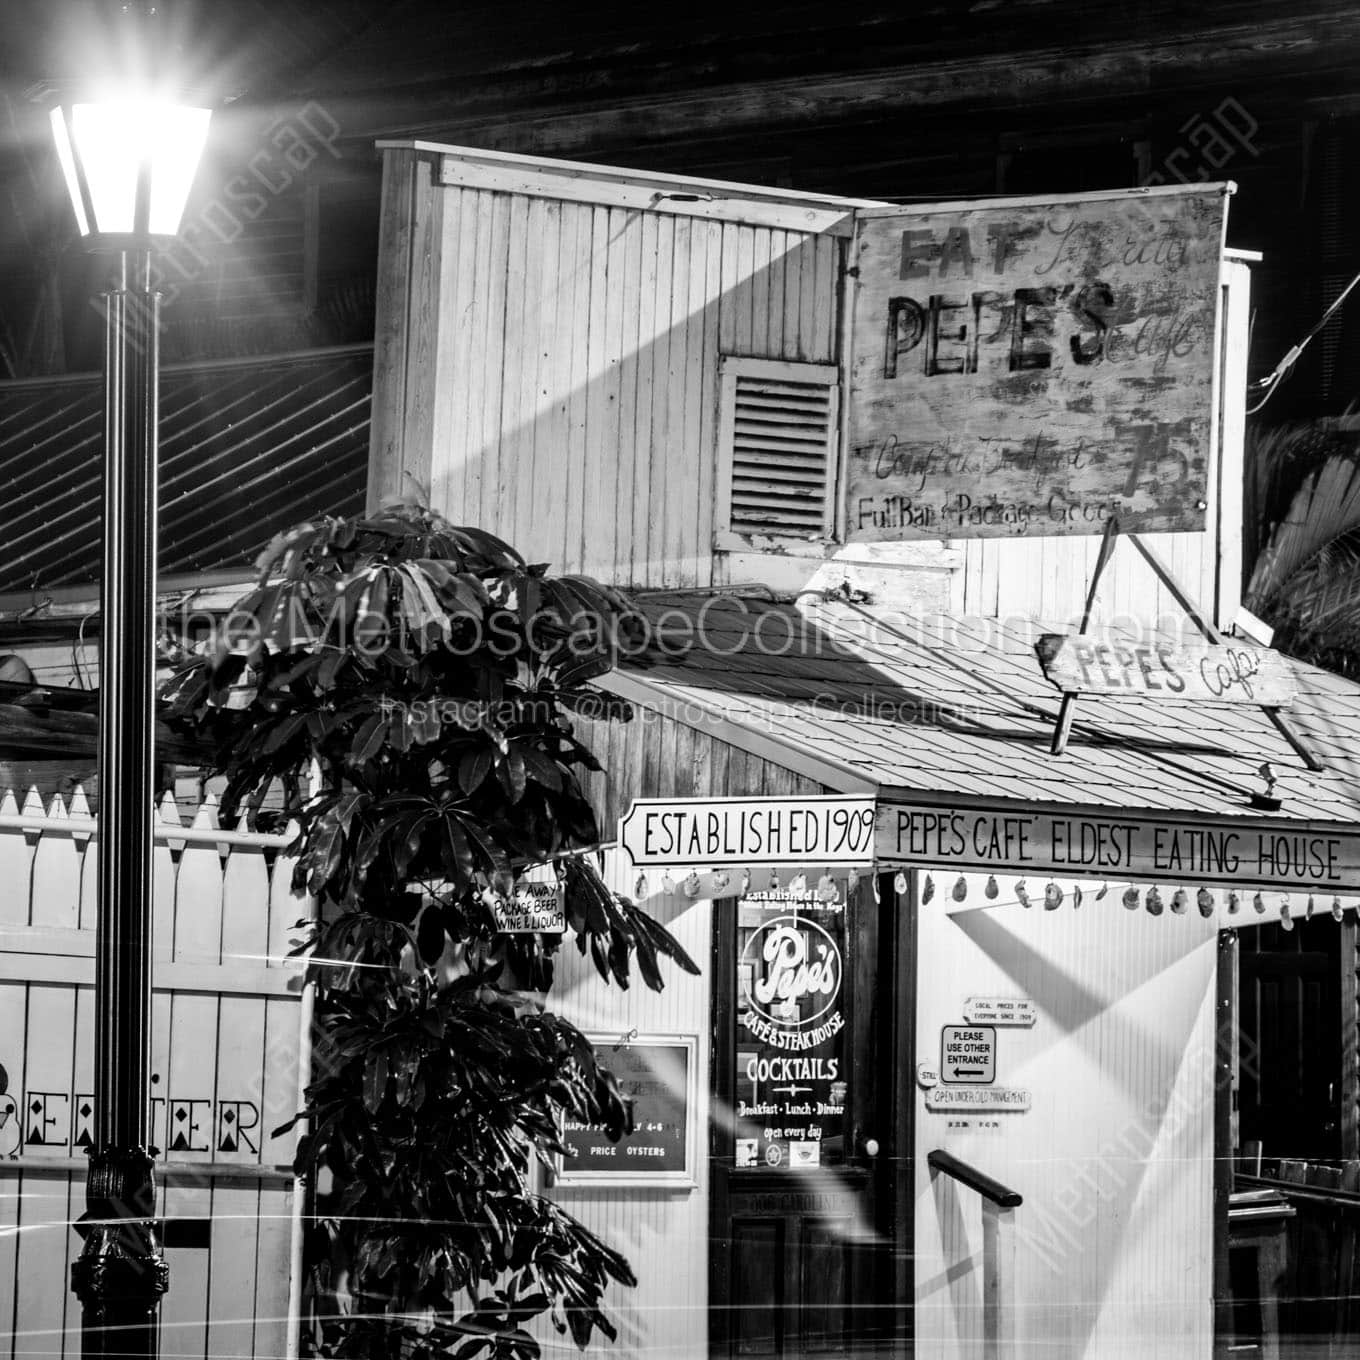 pepes cafe eating house at night Black & White Wall Art